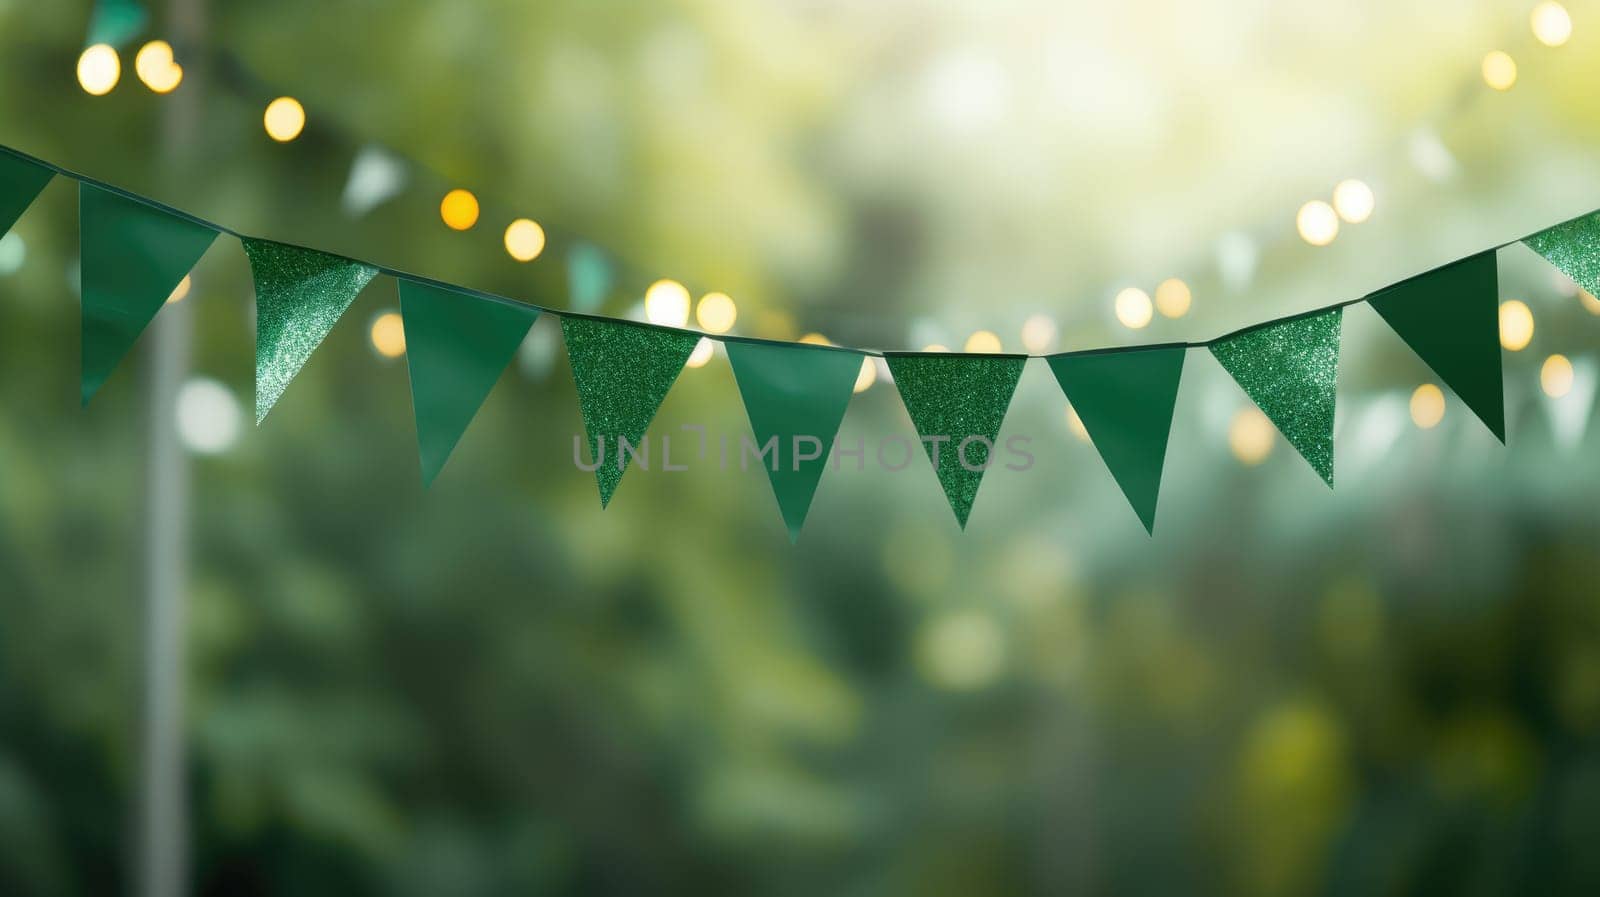 Green flags garland on a blurred background. Festive garland with lights by natali_brill